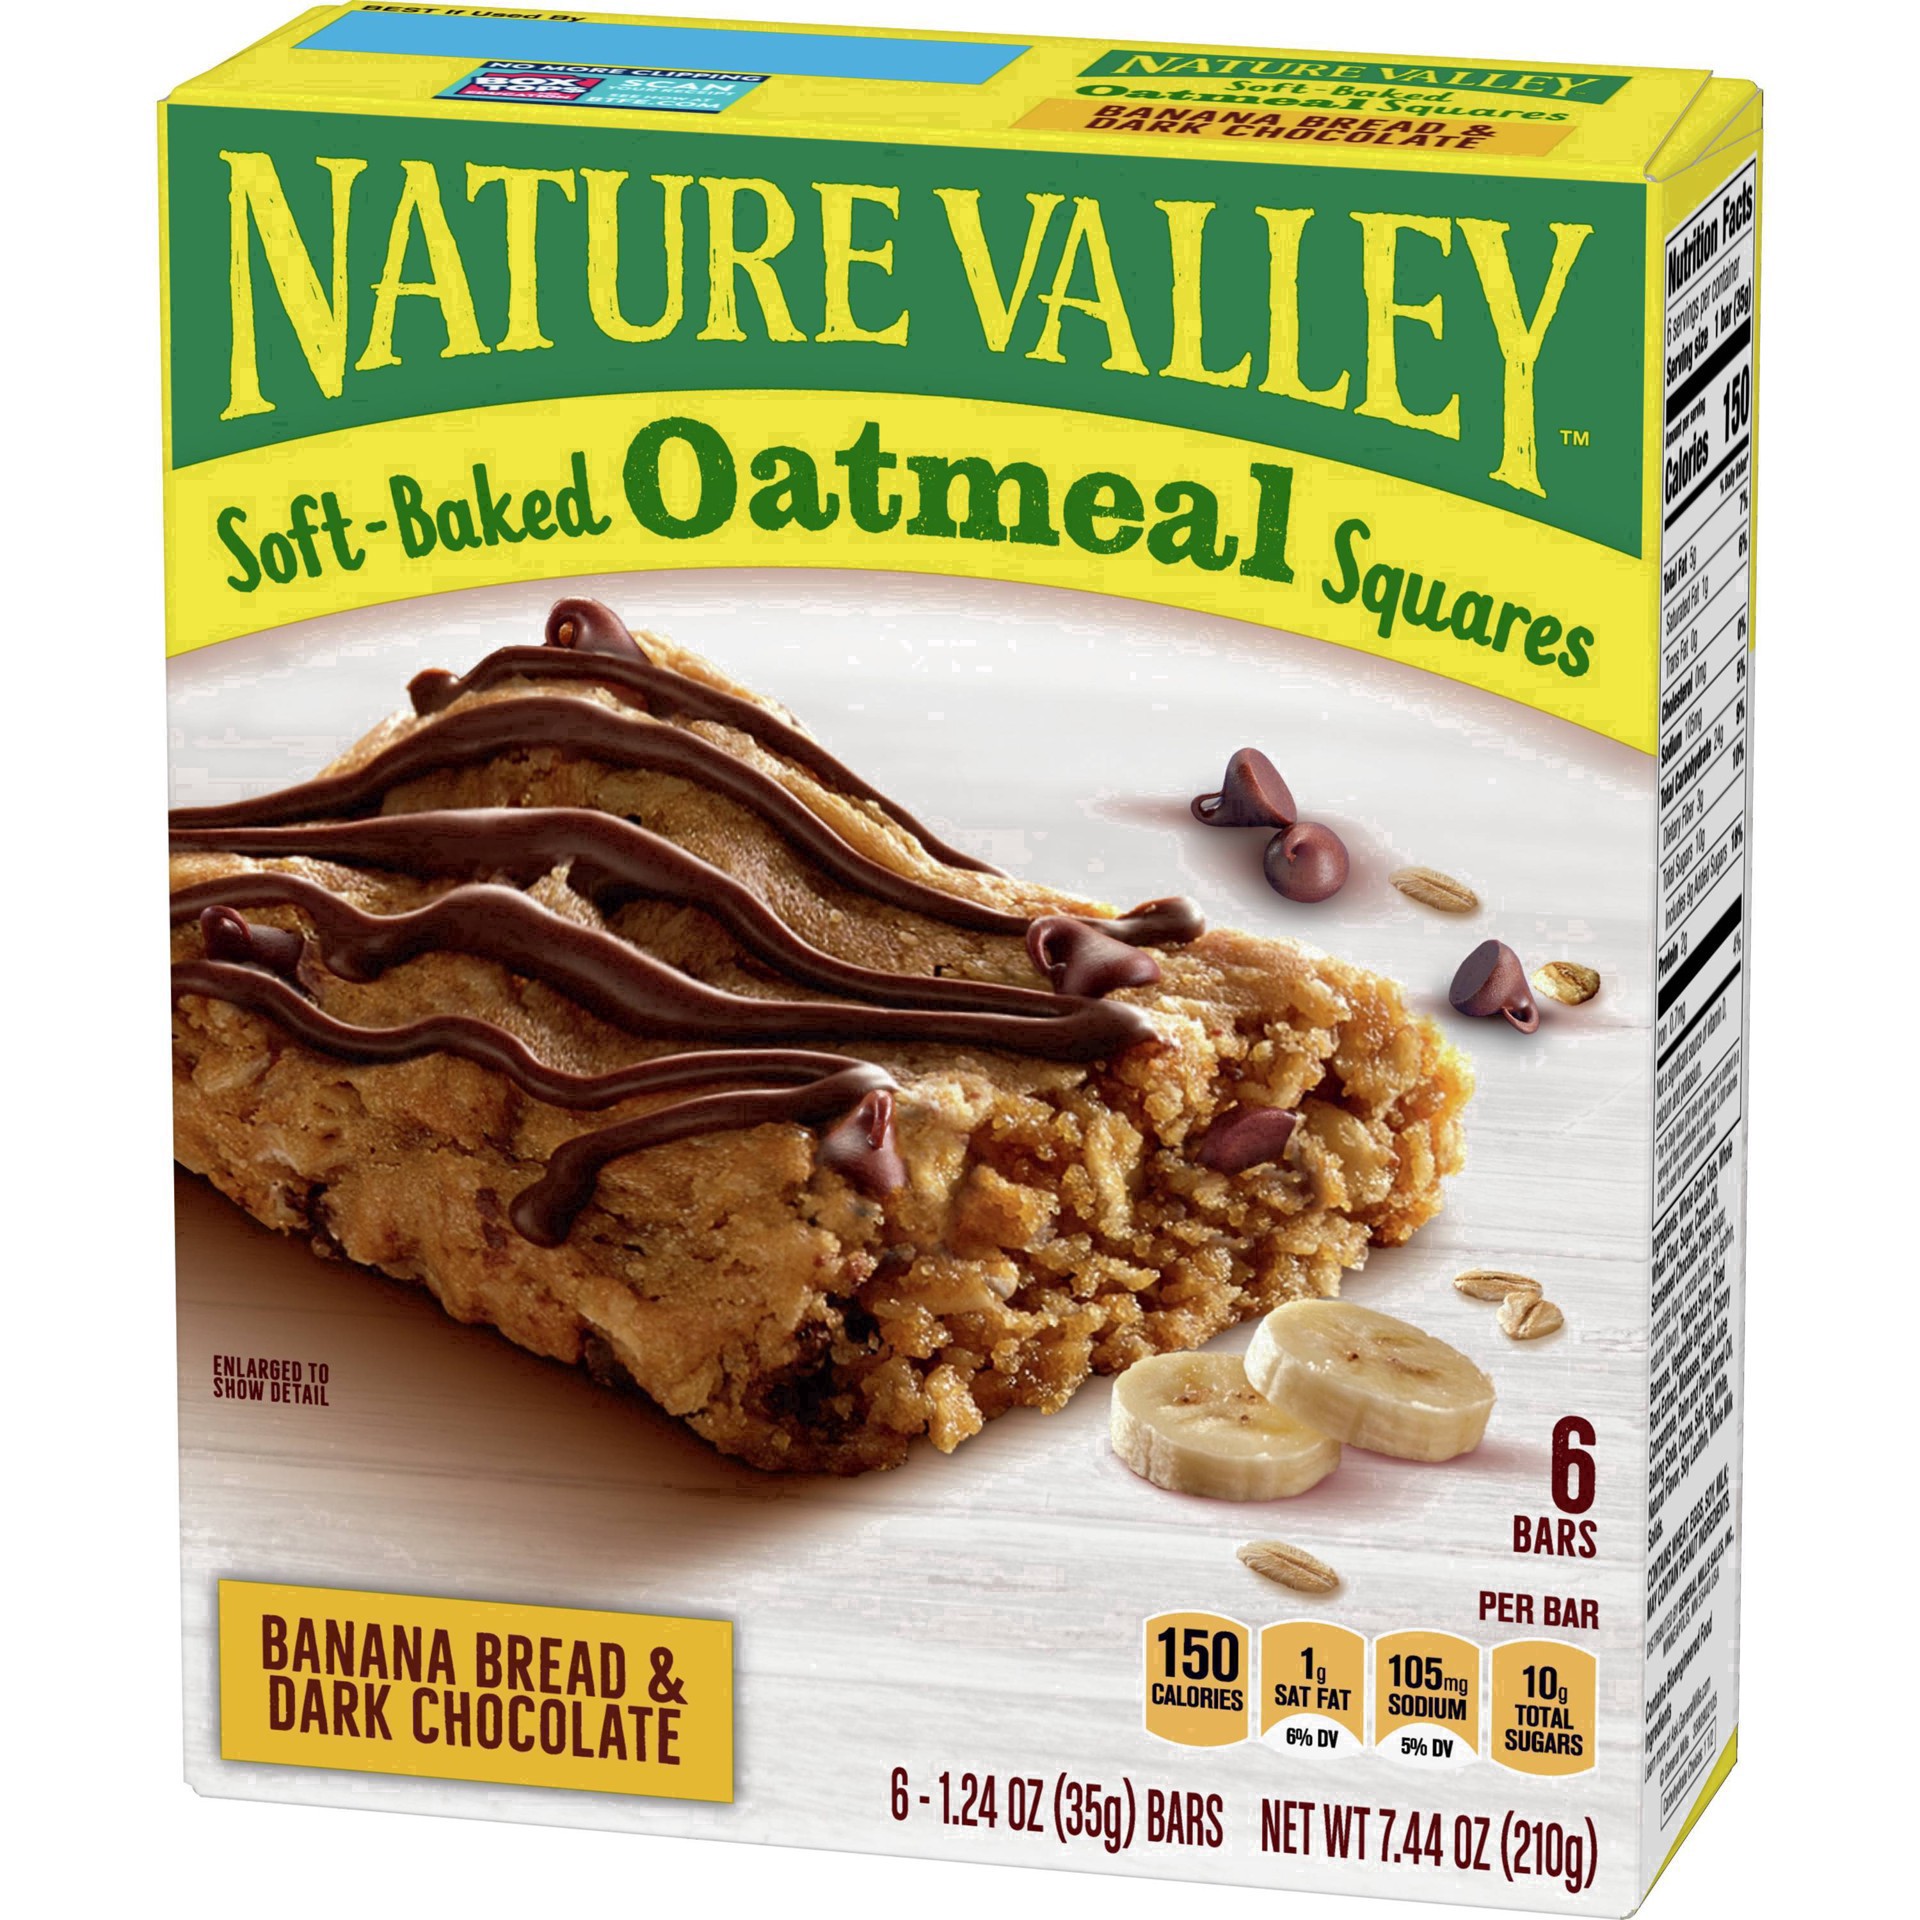 slide 24 of 101, Nature Valley Soft-Baked Oatmeal Squares, Banana Bread & Dark Chocolate, 6 ct, 6 ct